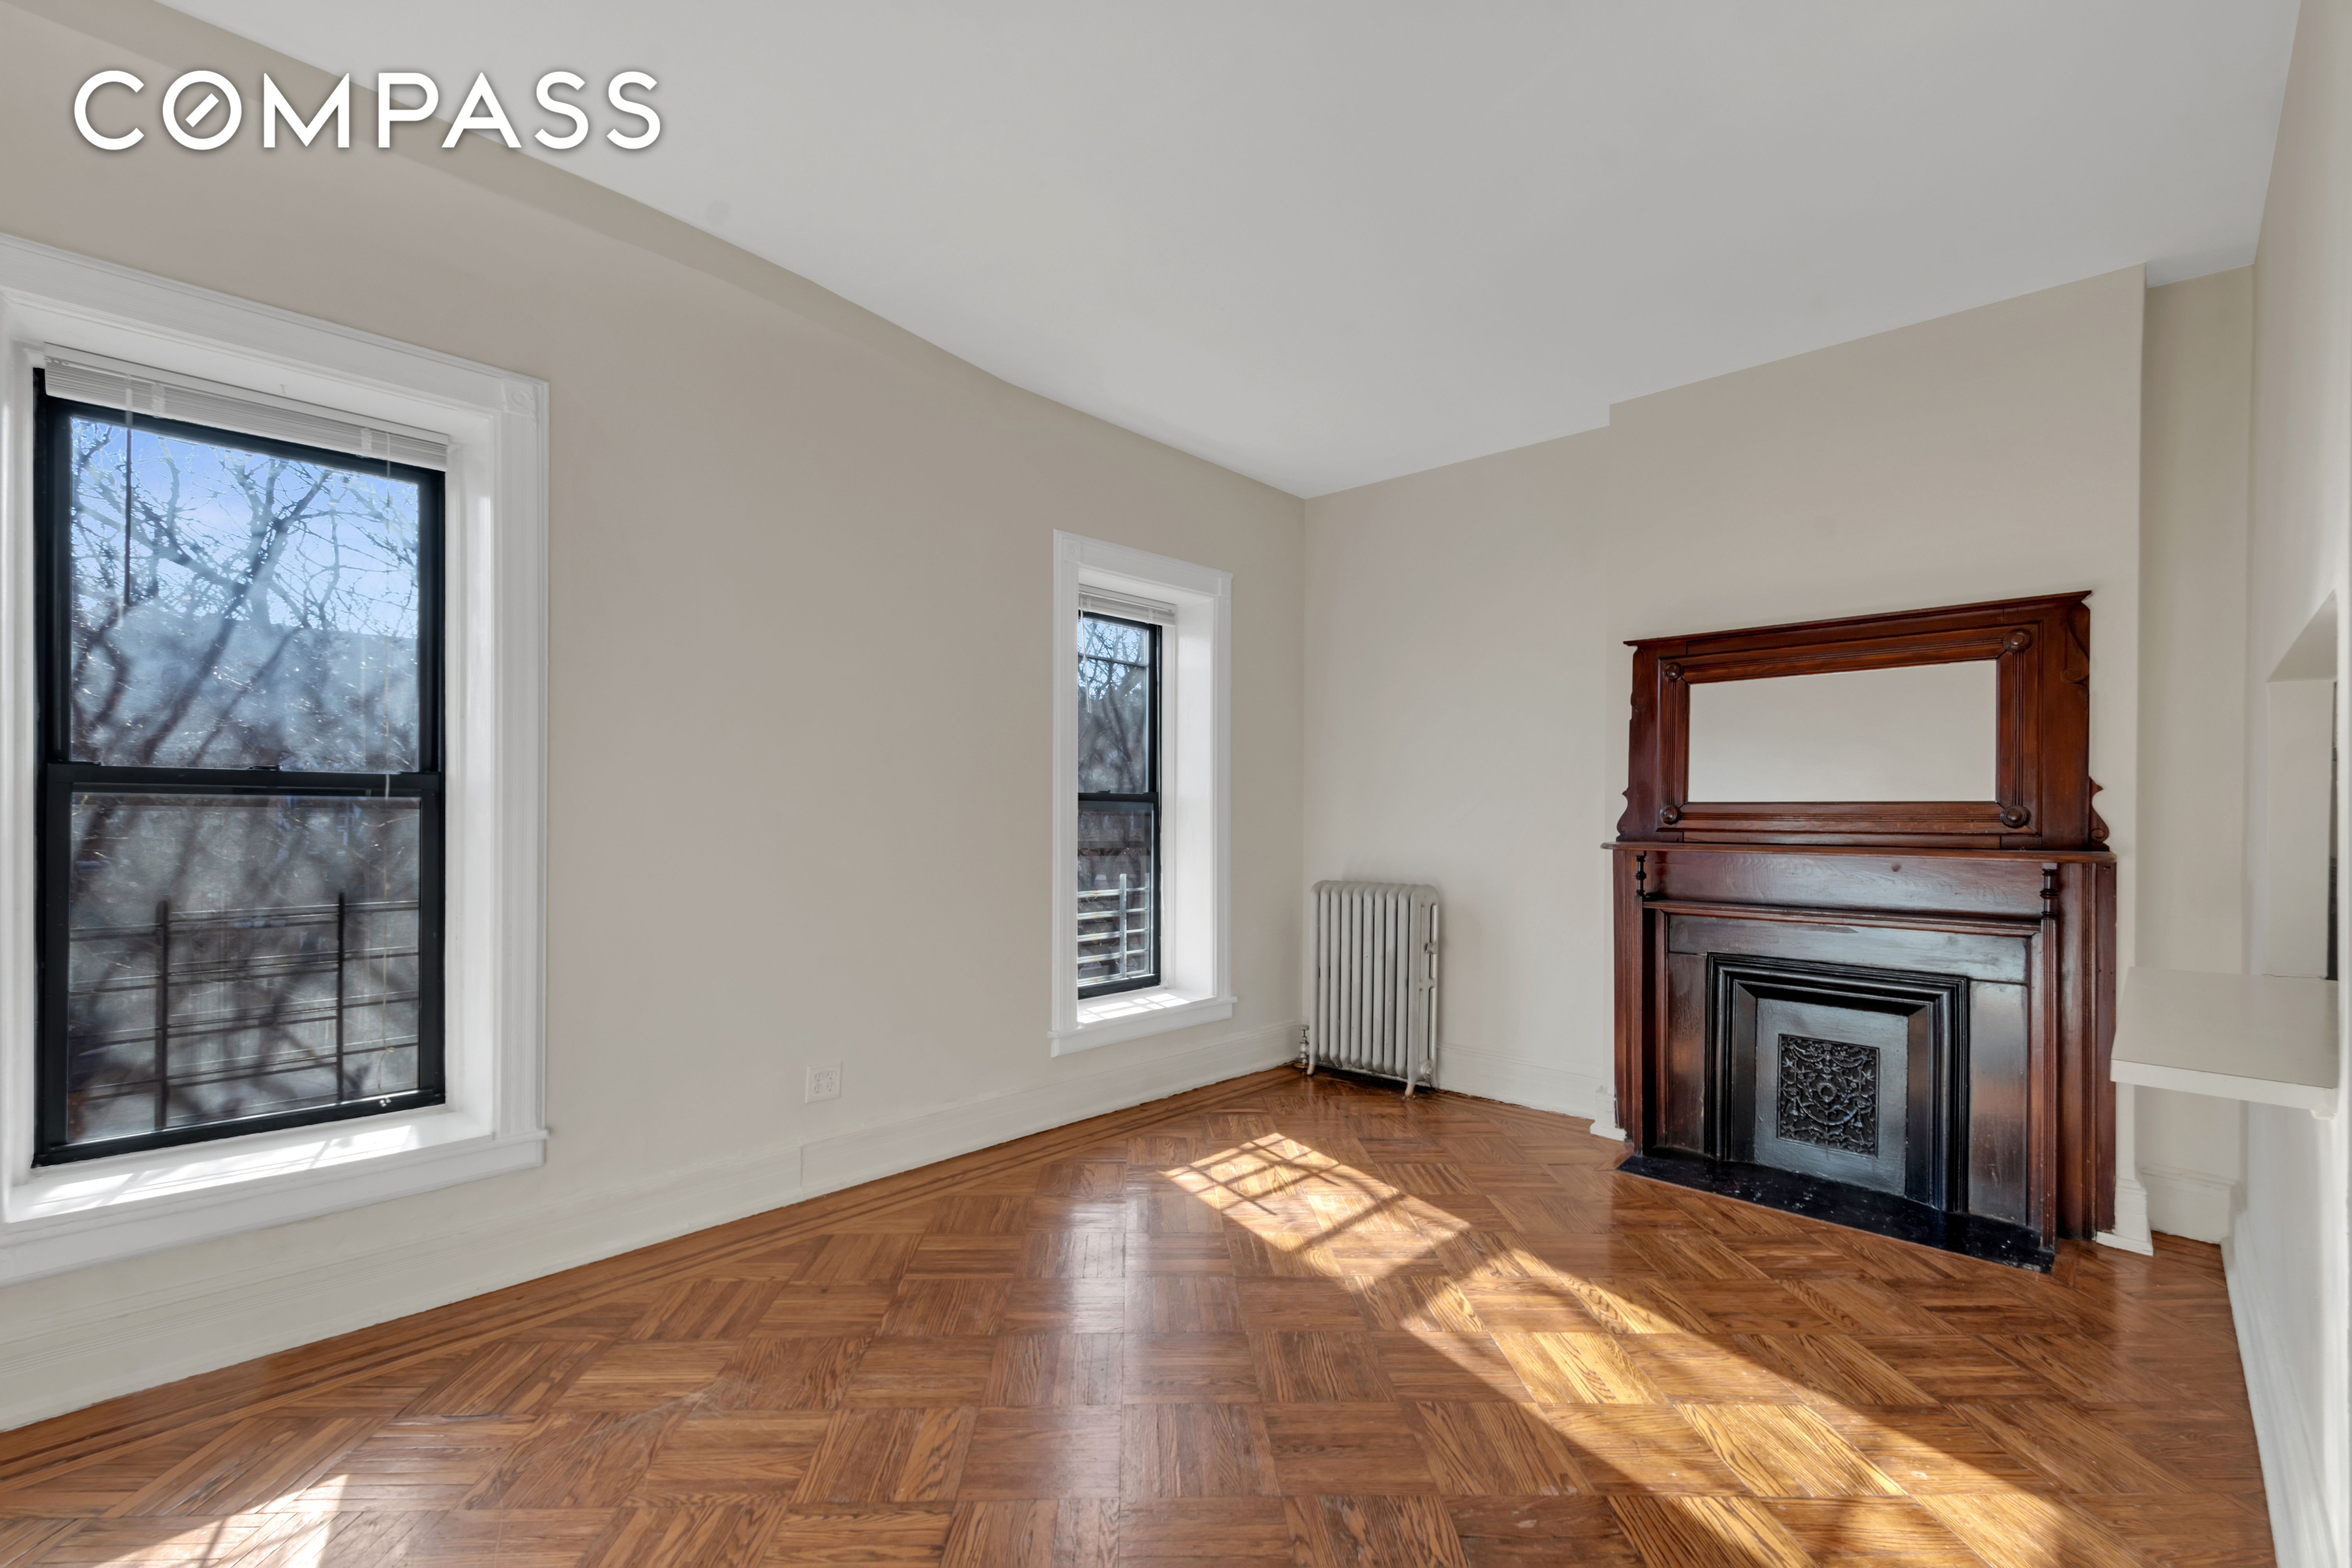 309 West 138th Street, New York City NY 10030 A.N Shell Realty